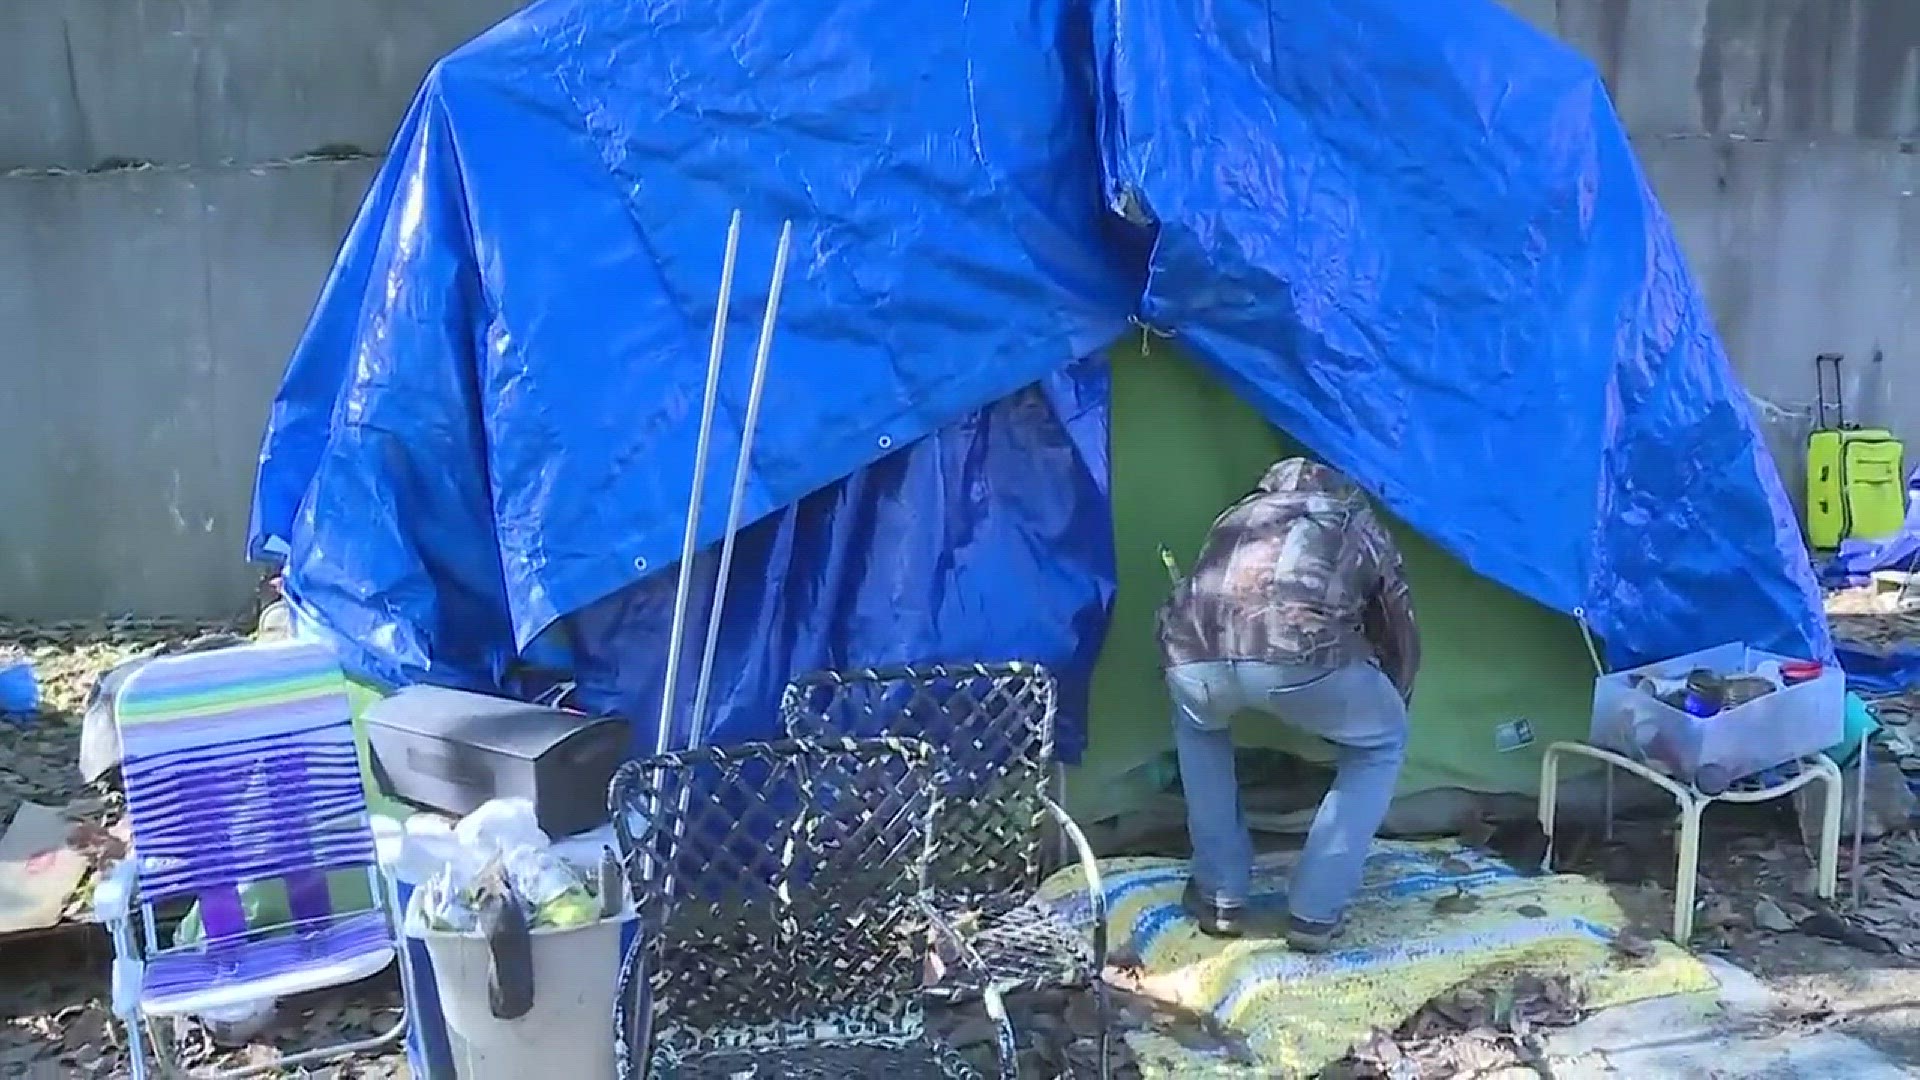 Akron's tent city gets notice to shut down or file to rezone in 30 days